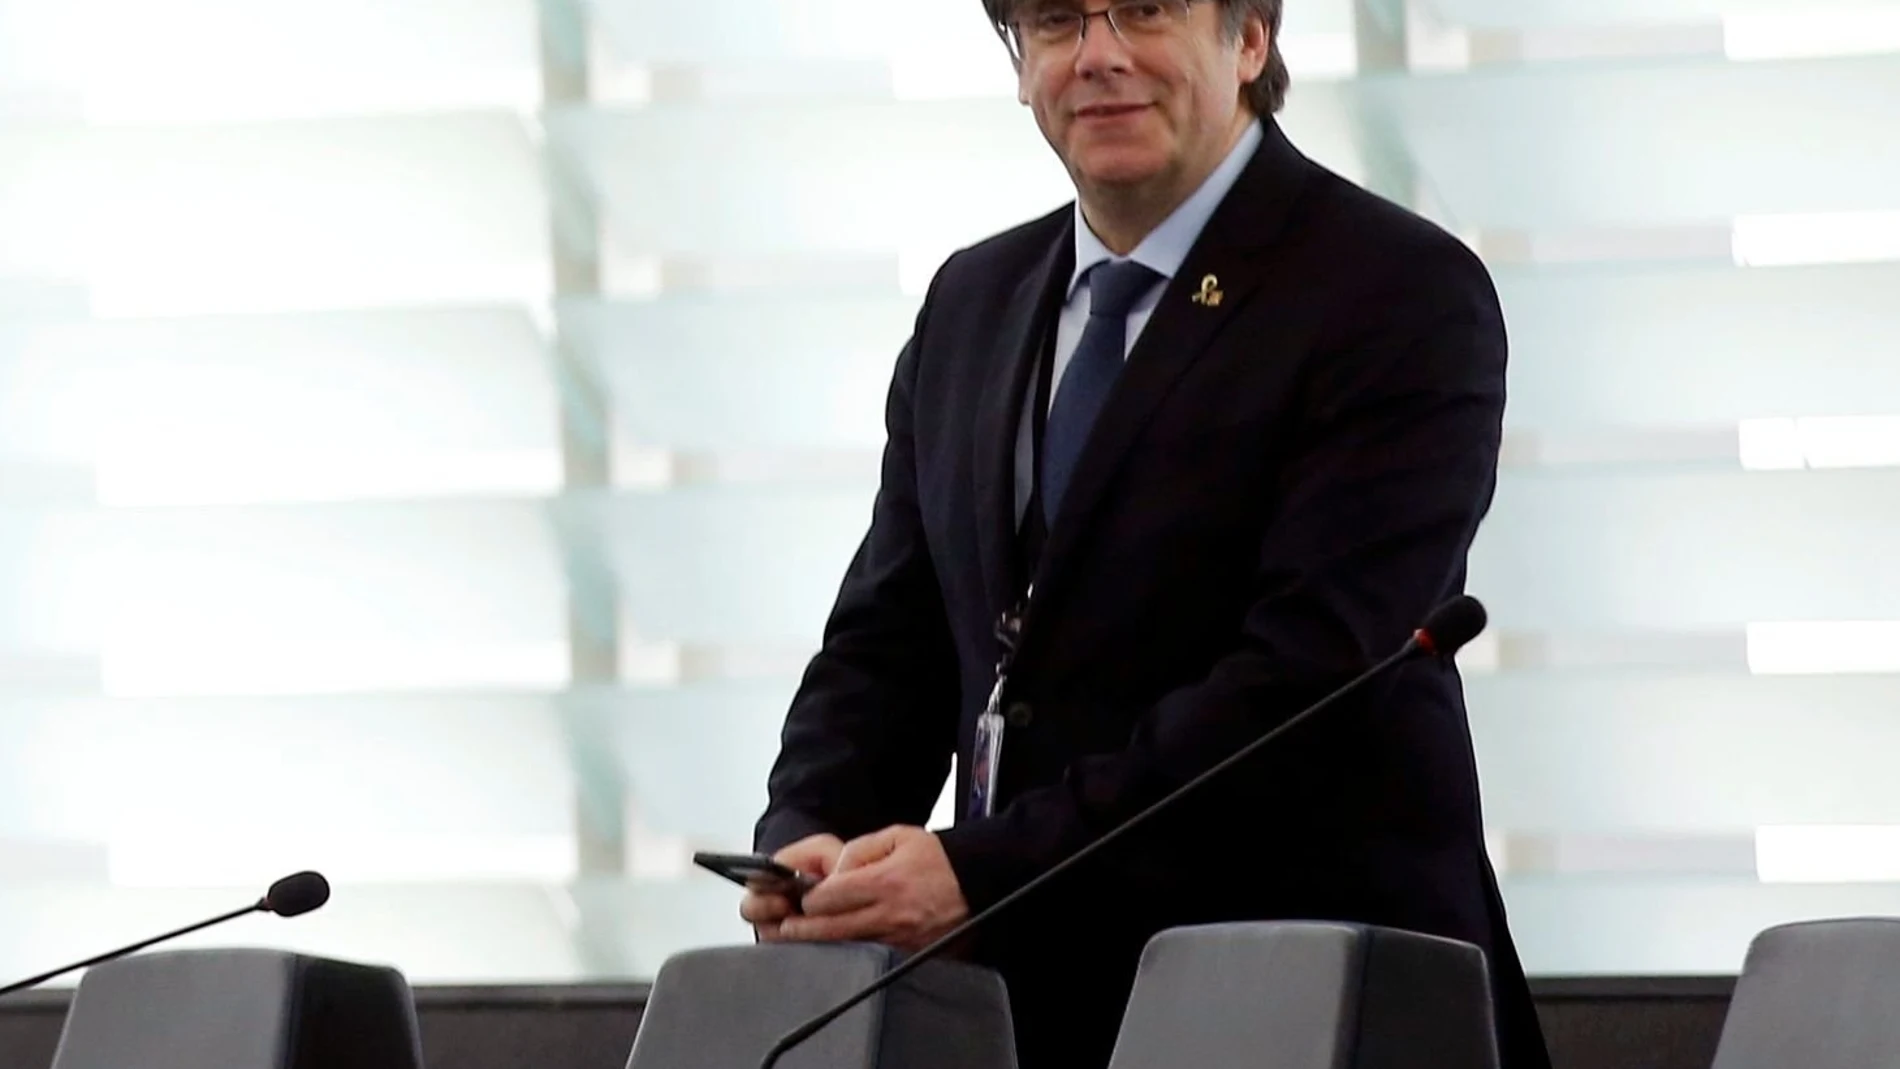 Former member of the Catalan government Carles Puigdemont is seen at the European Parliament in Strasbourg